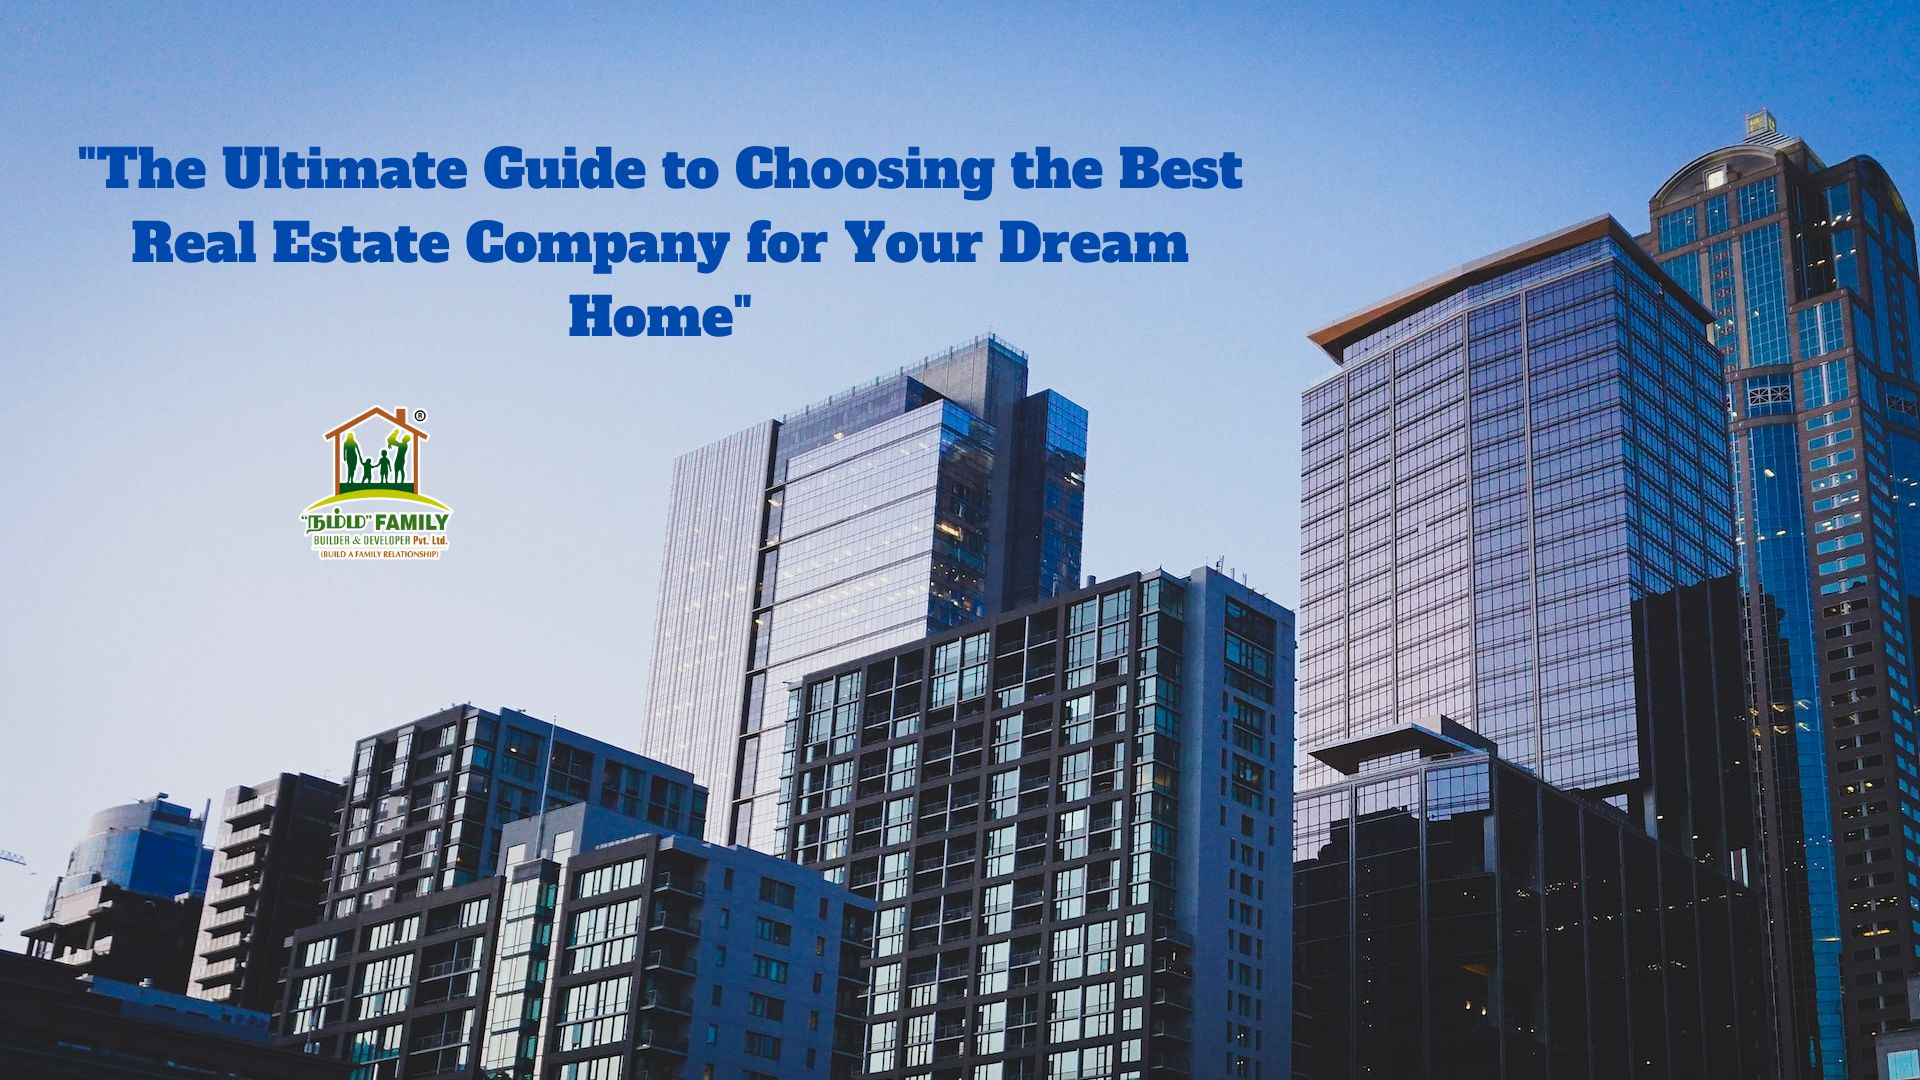 "The Ultimate Guide to Choosing the Best Real Estate Company for Your Dream Home" - Namma Family Builder